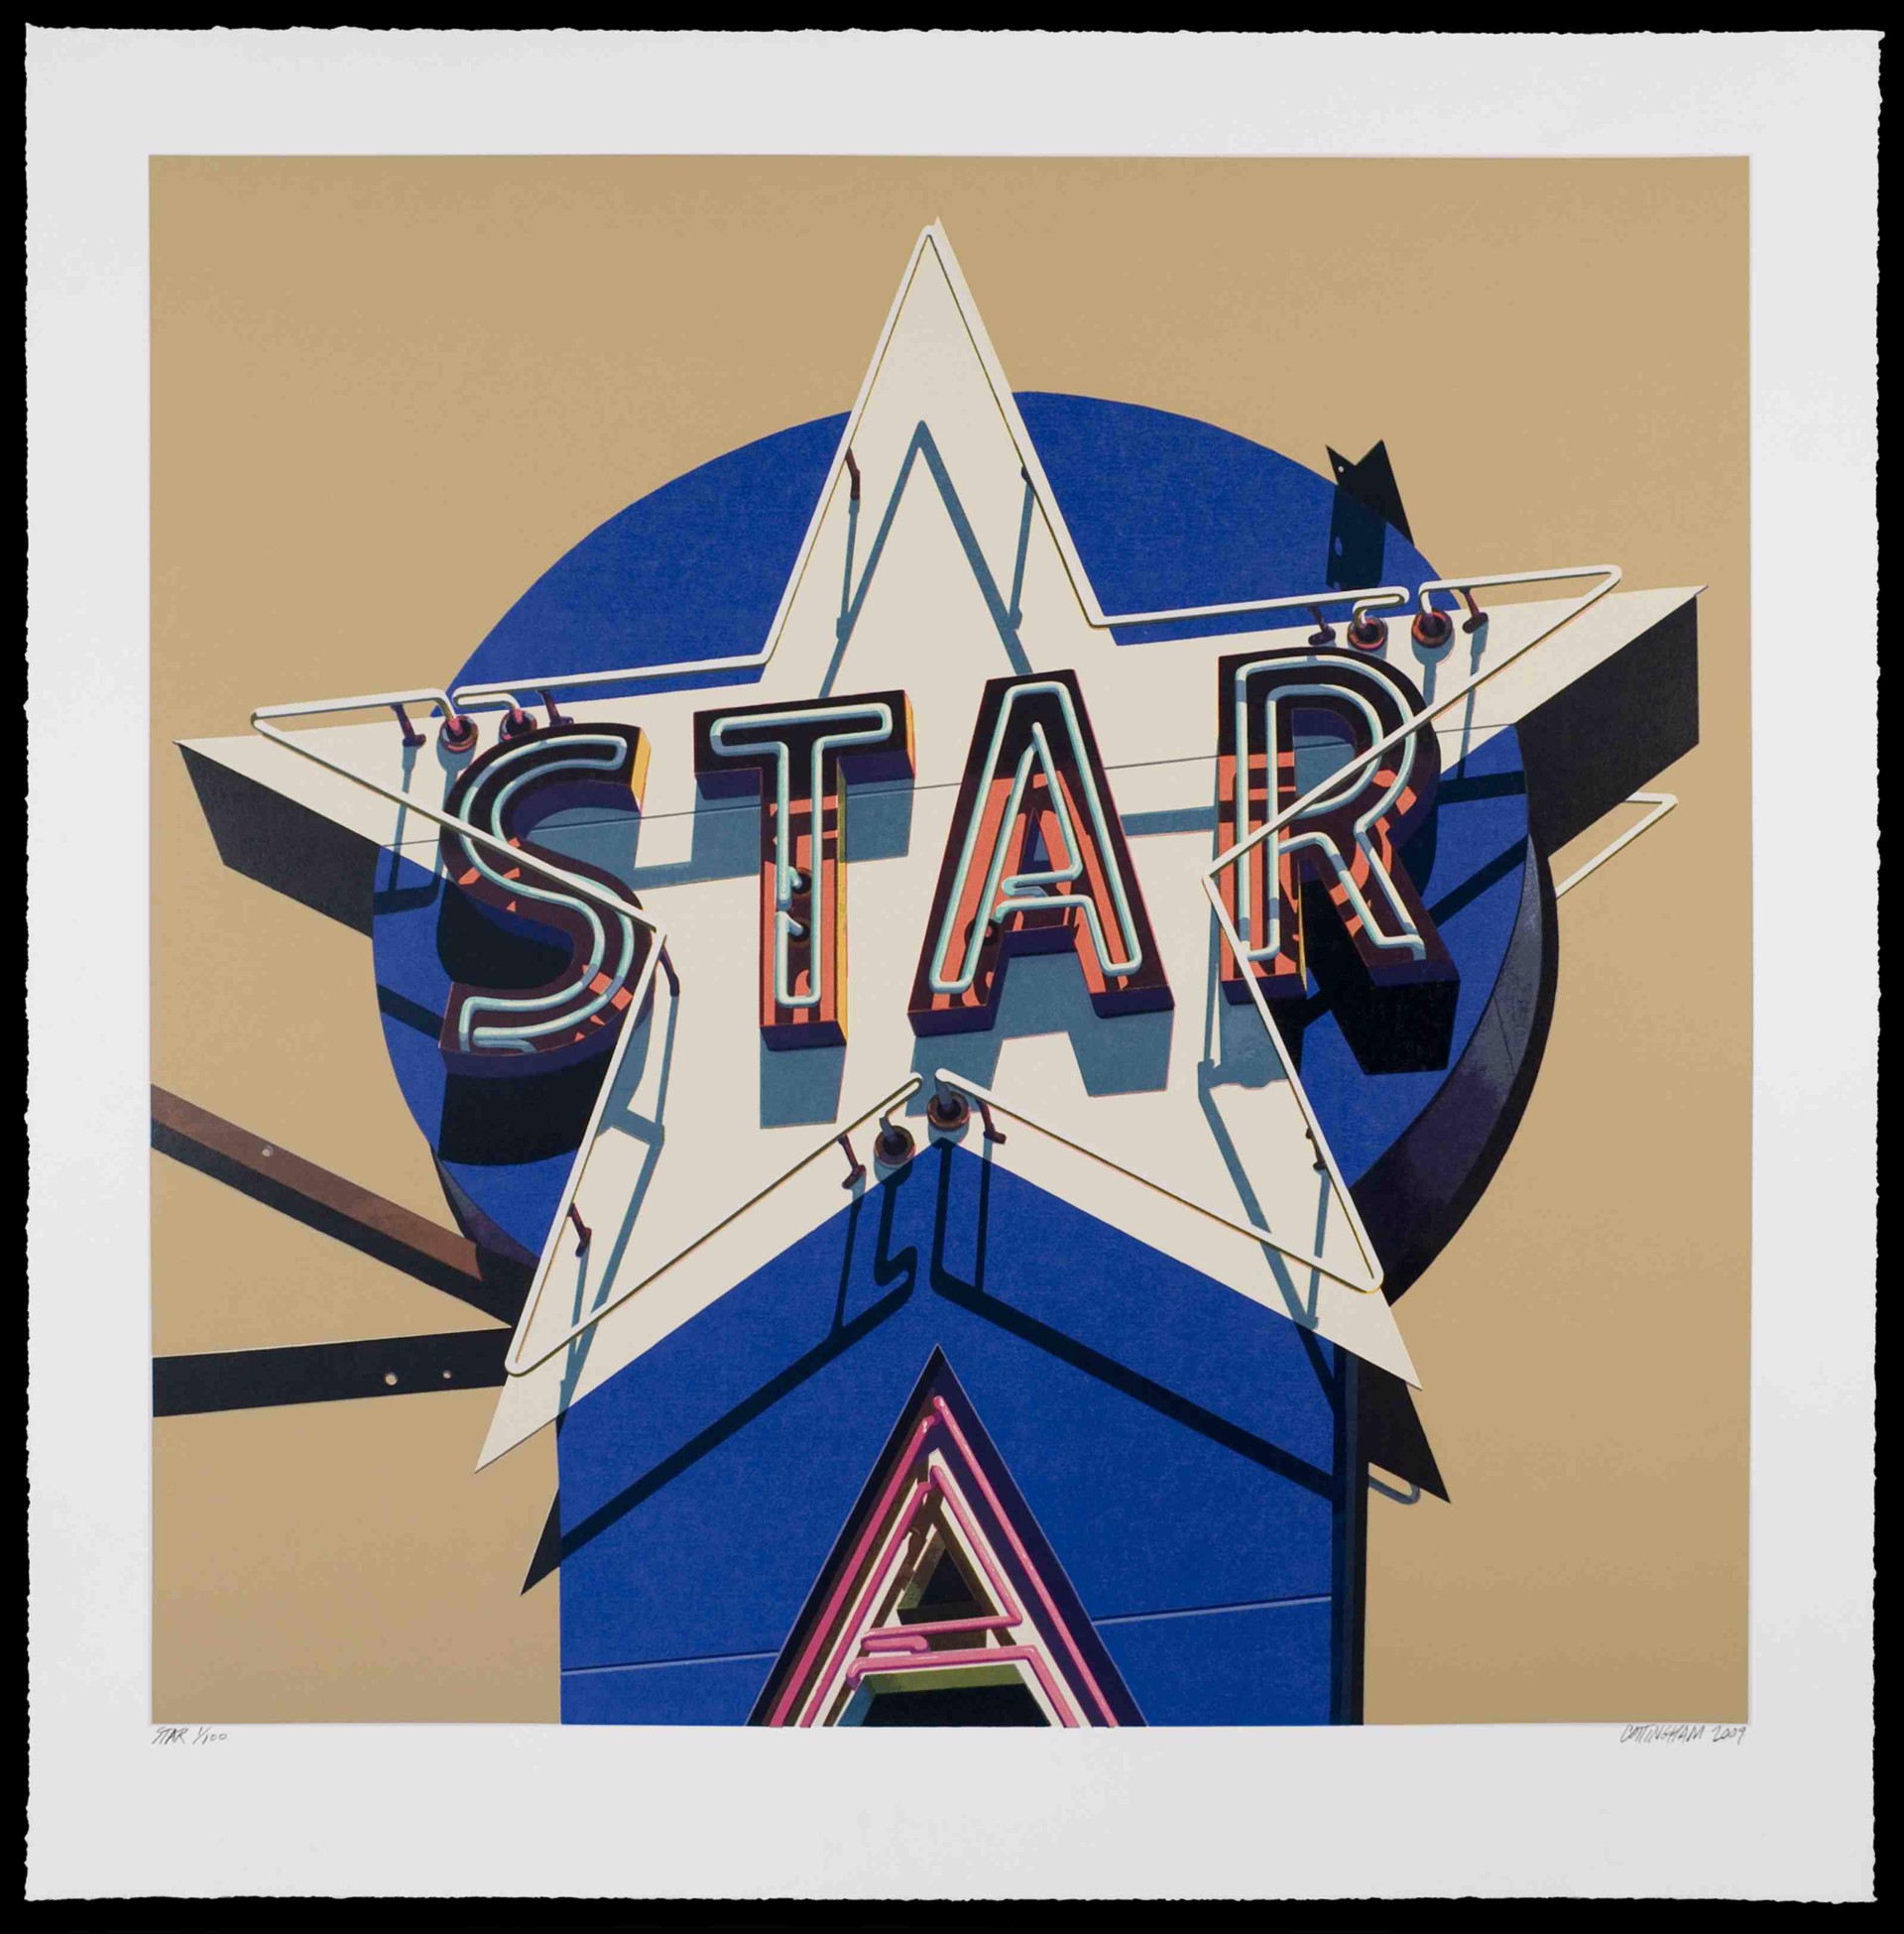 Star (from American Signs portfolio) by Robert Cottingham